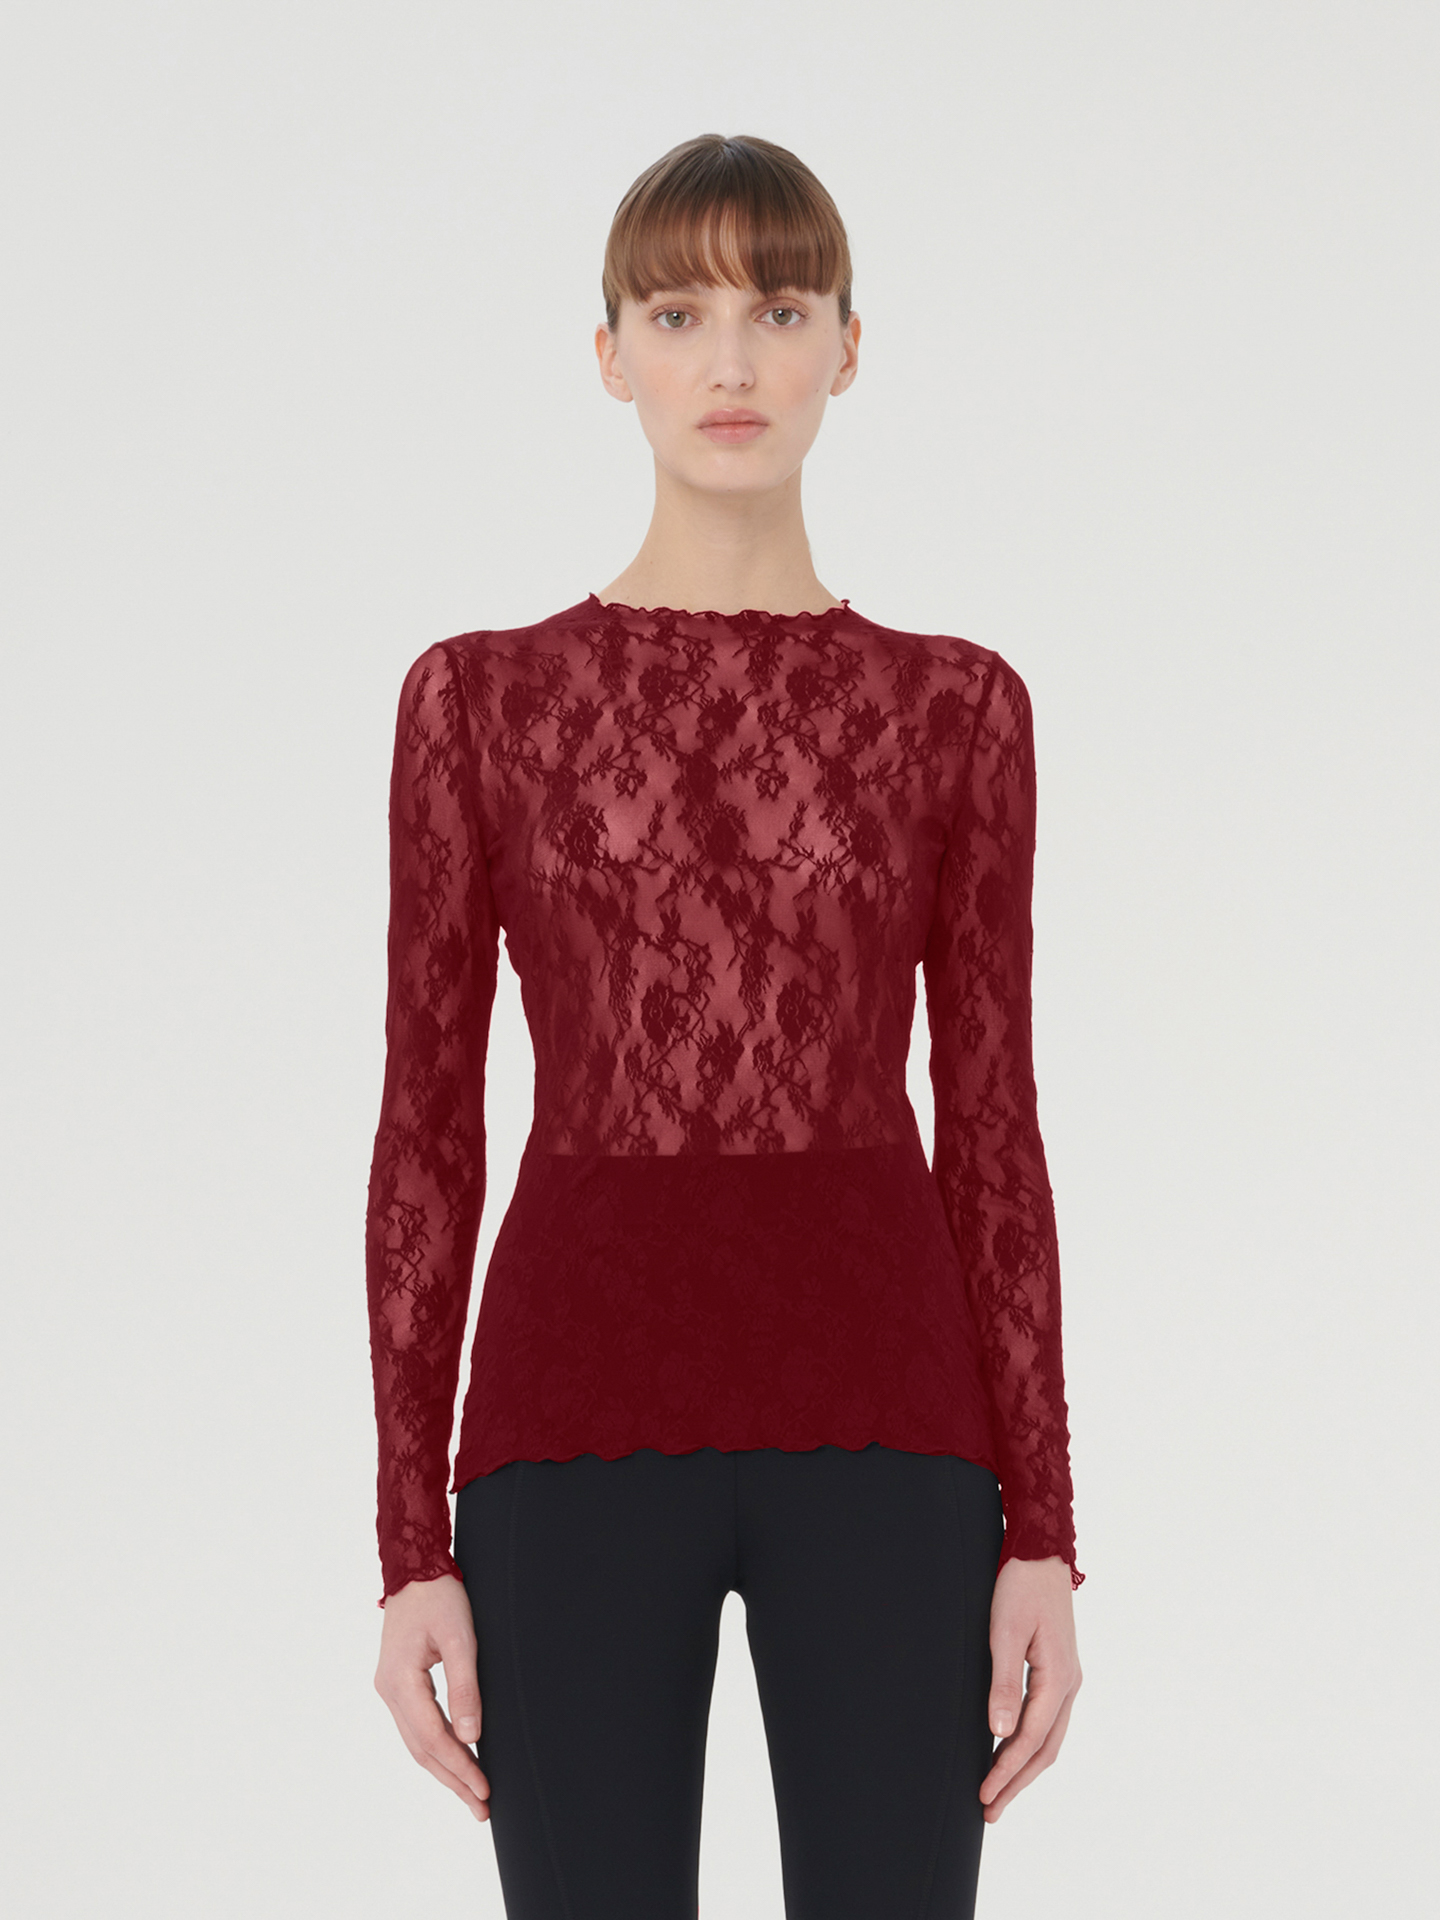 Wolford - Floral Lace Top Long Sleeves, Frau, soft cherry, Größe: M von Wolford